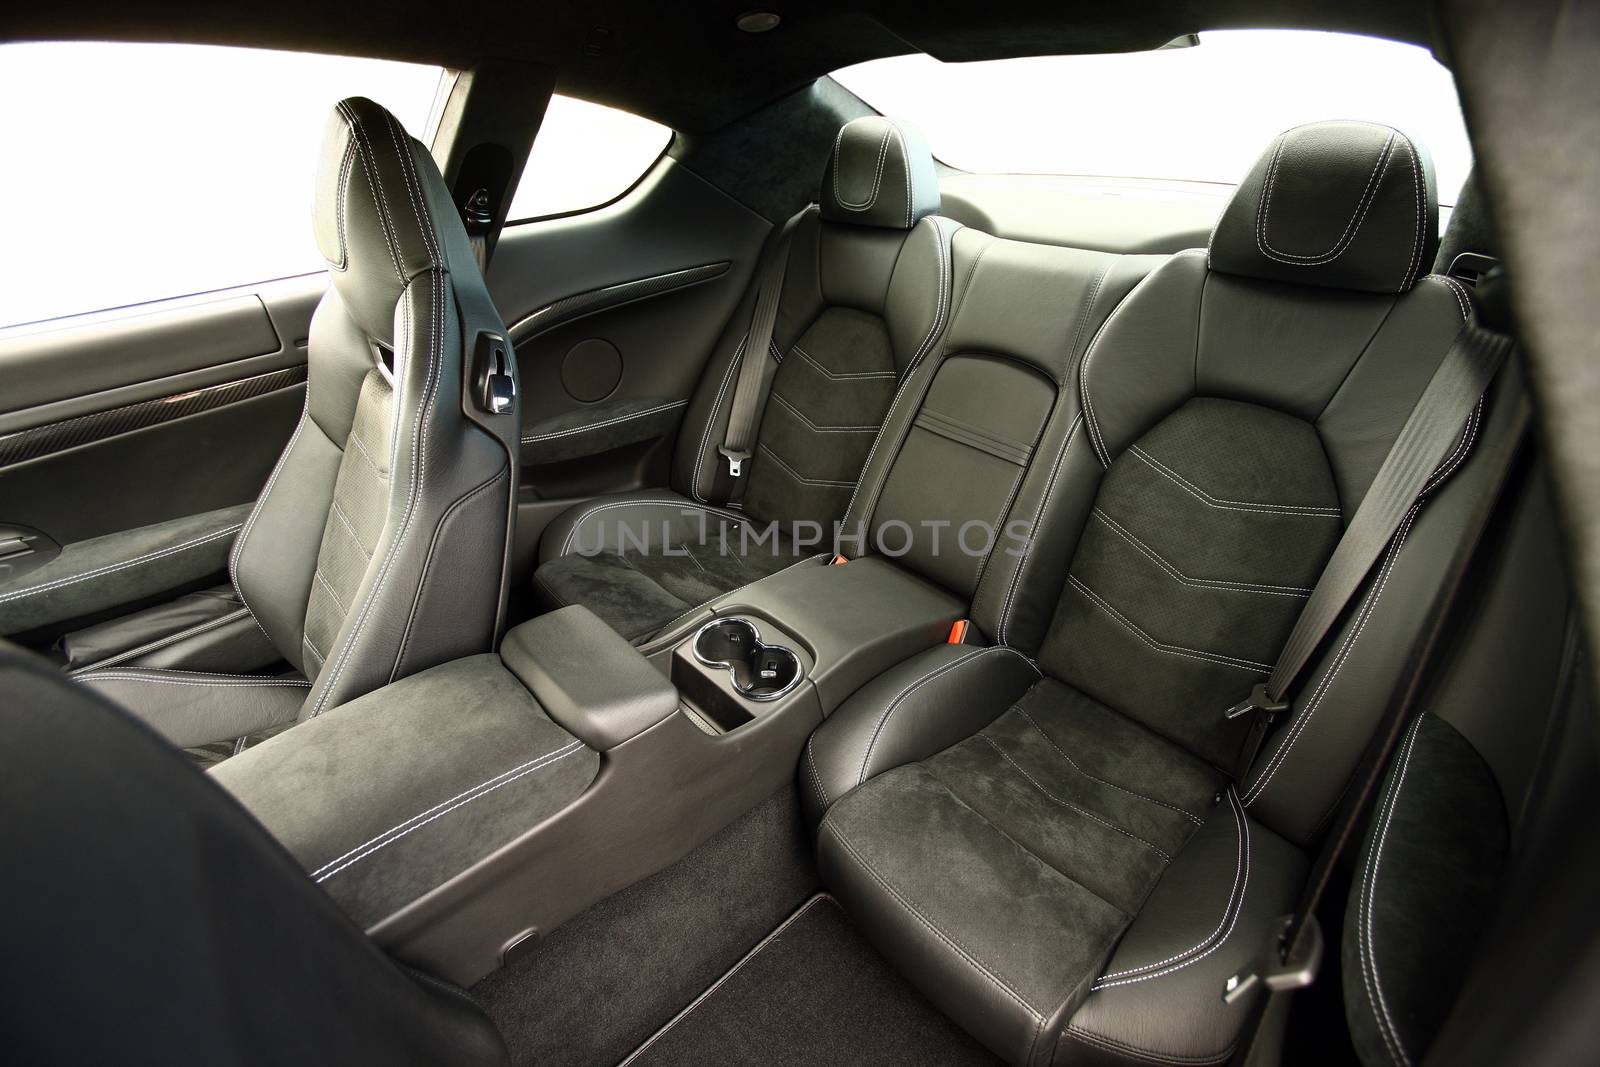 Rear leather seats in a large luxury sports car